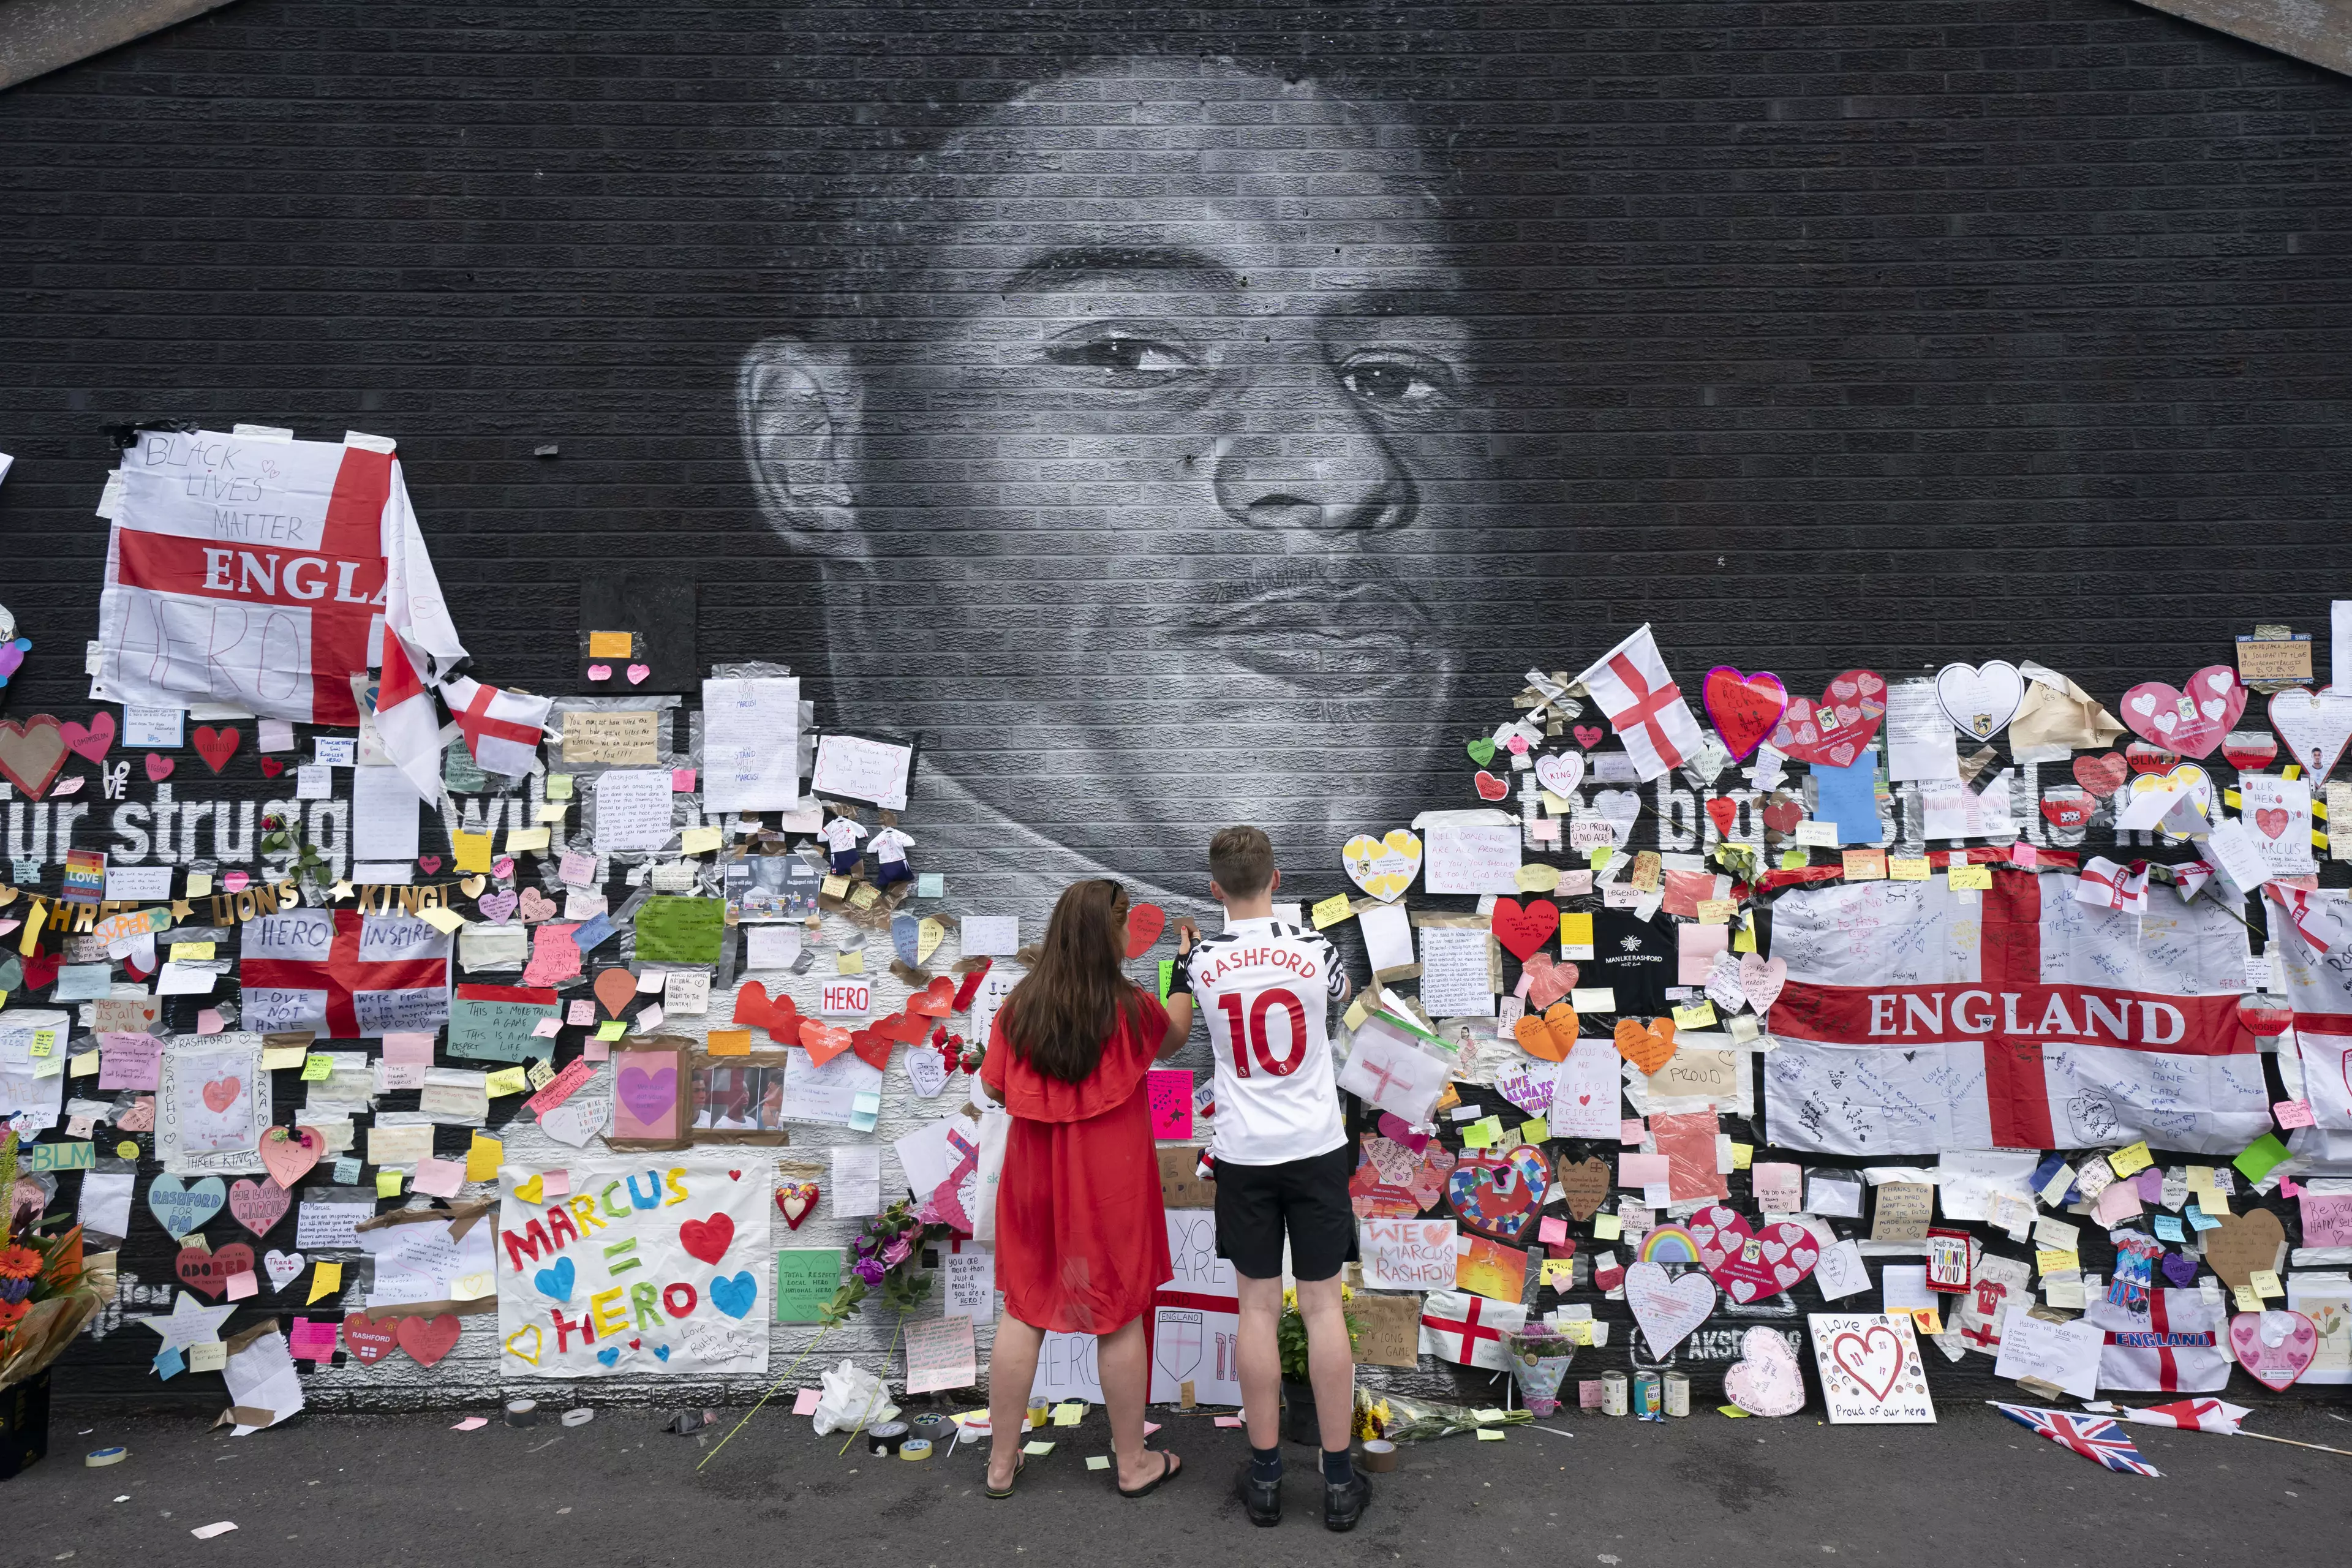 Fans decorate Marcus Rashford's mural after it was defaced. Image: PA Images